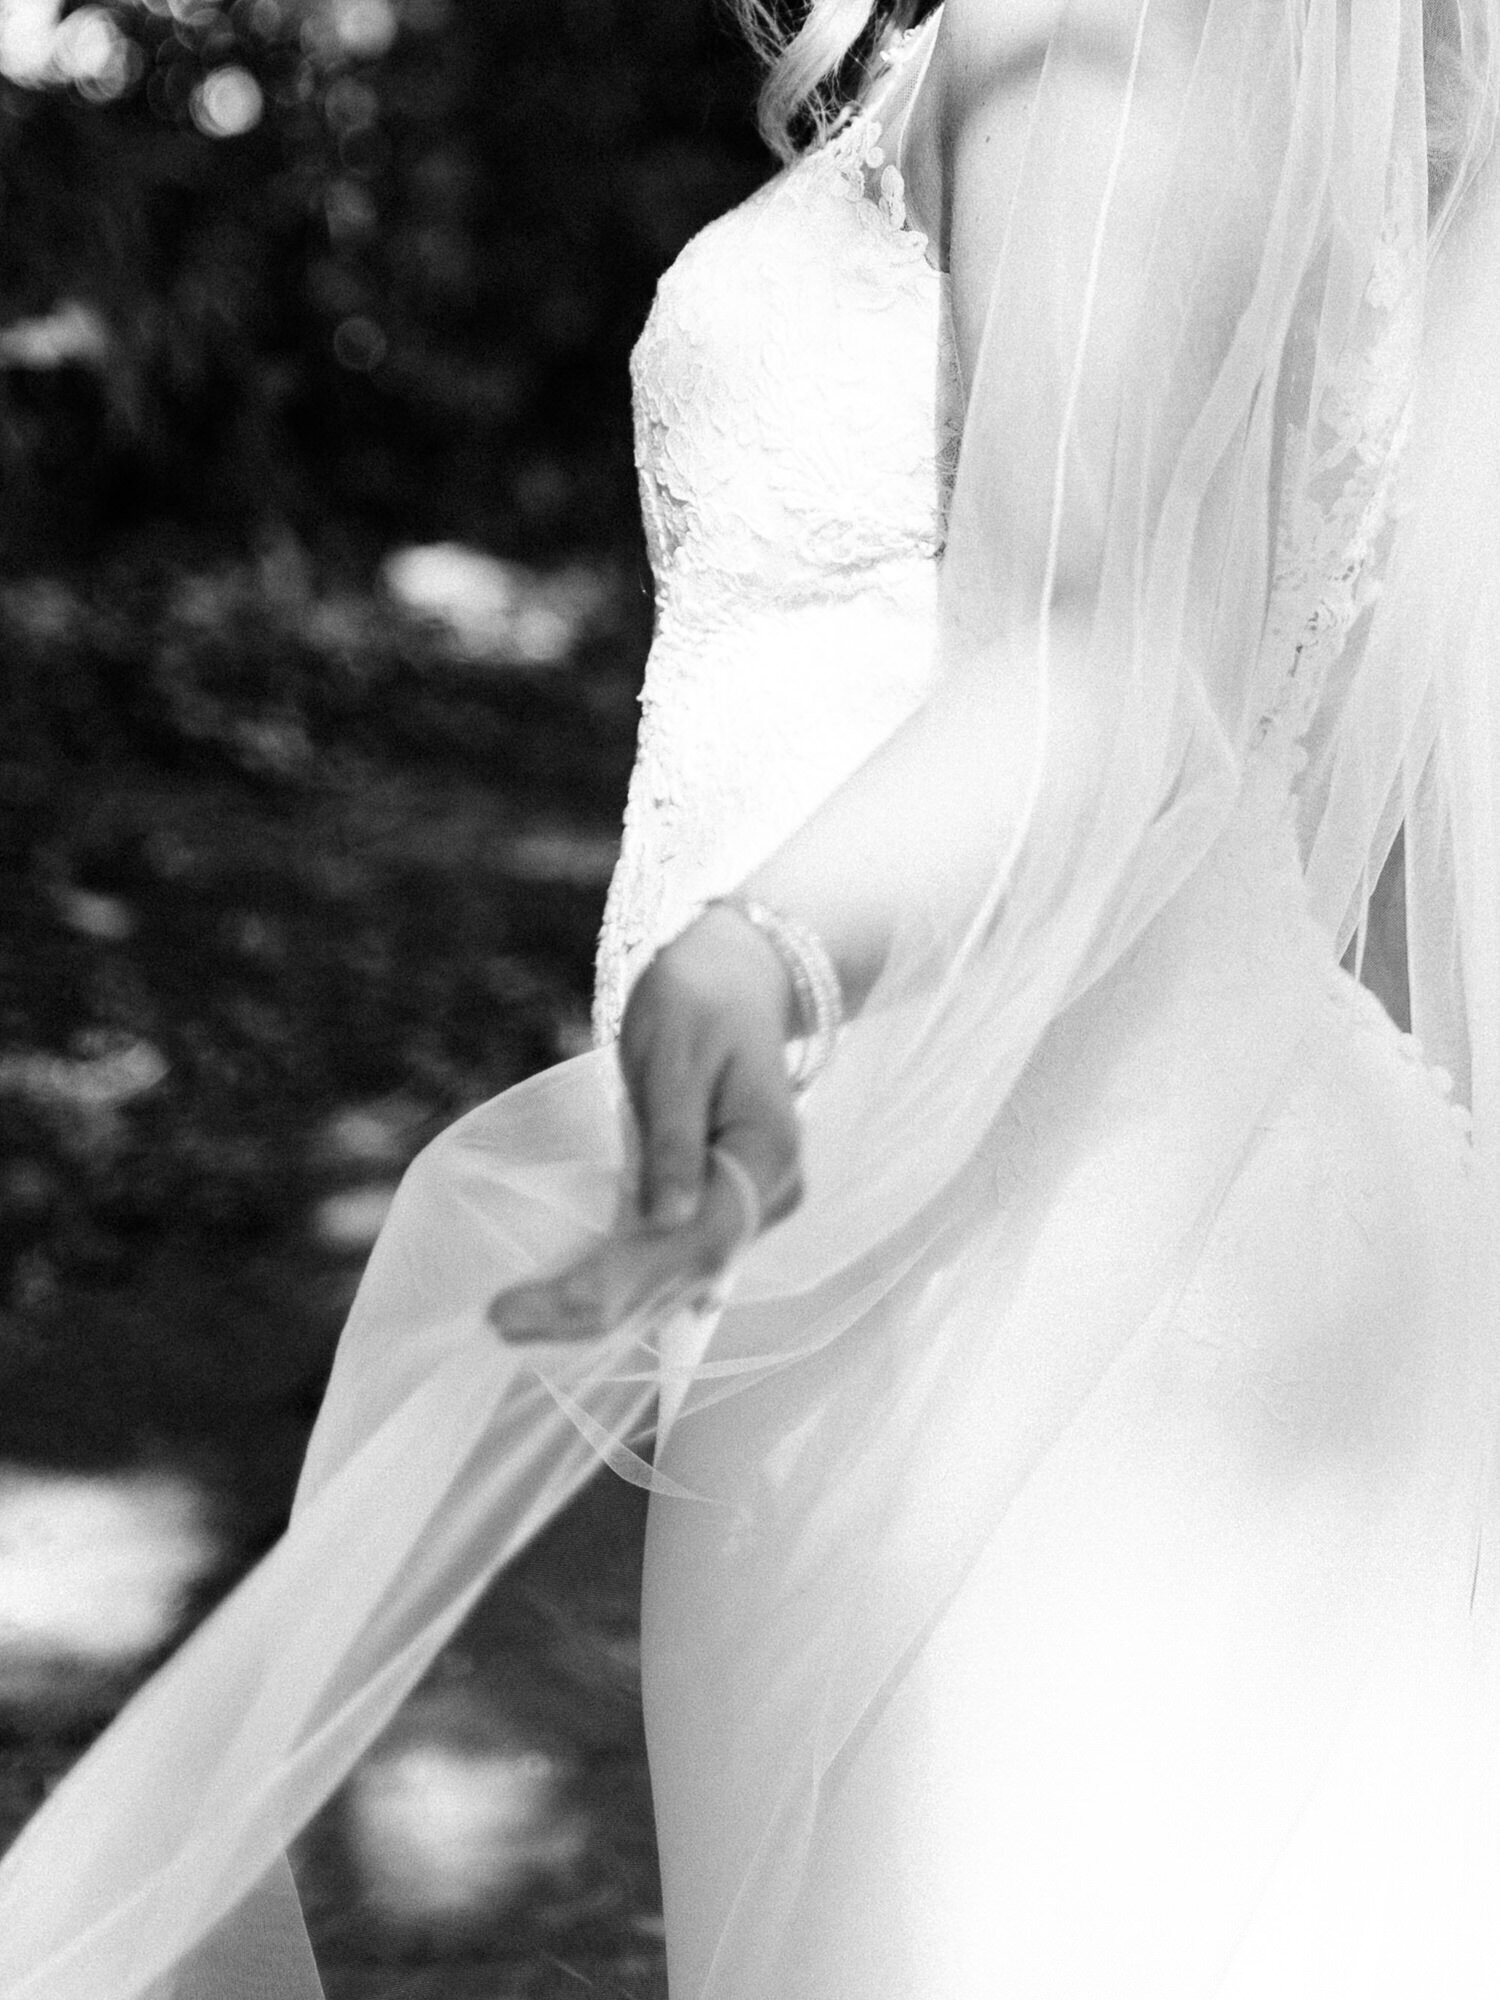 An artistic, film-inspired image taken by Denver wedding photographer KD Captures. A bride is twisting while holding her veil. This image only shows her hand and her veil.